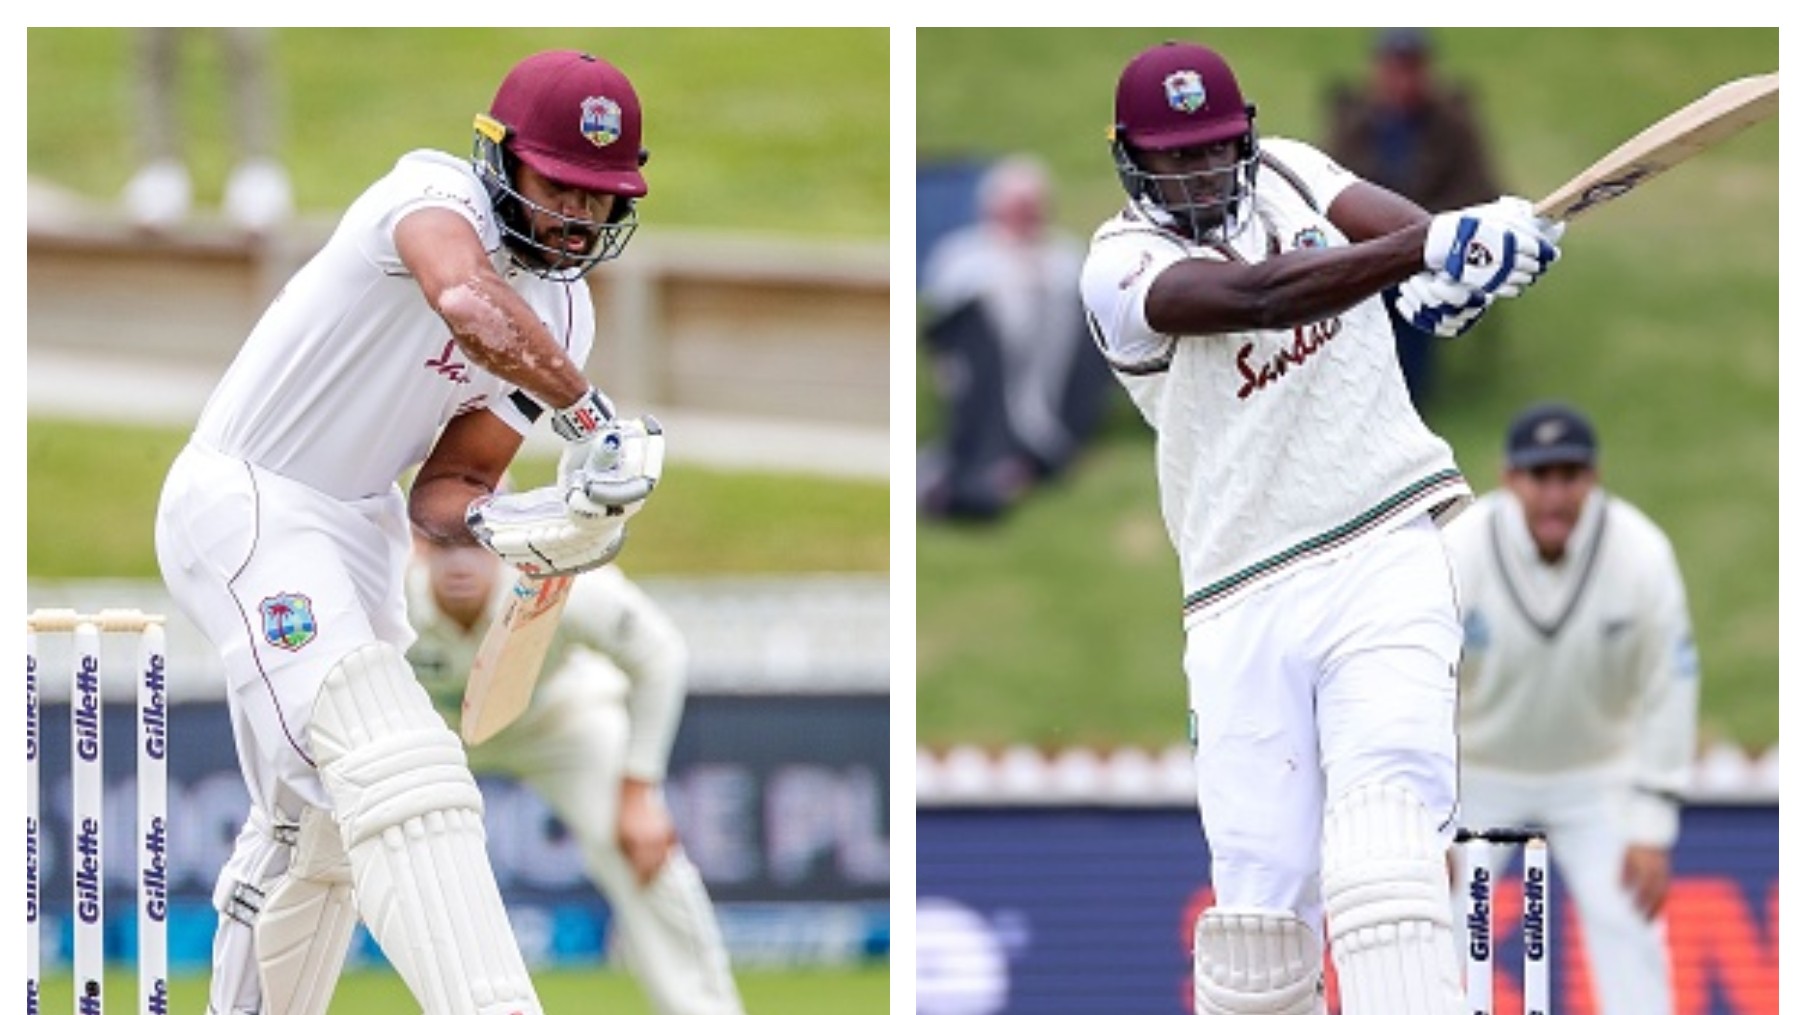 NZ v WI 2020: Campbell, Holder score fifties as visitors fight after being asked to follow-on